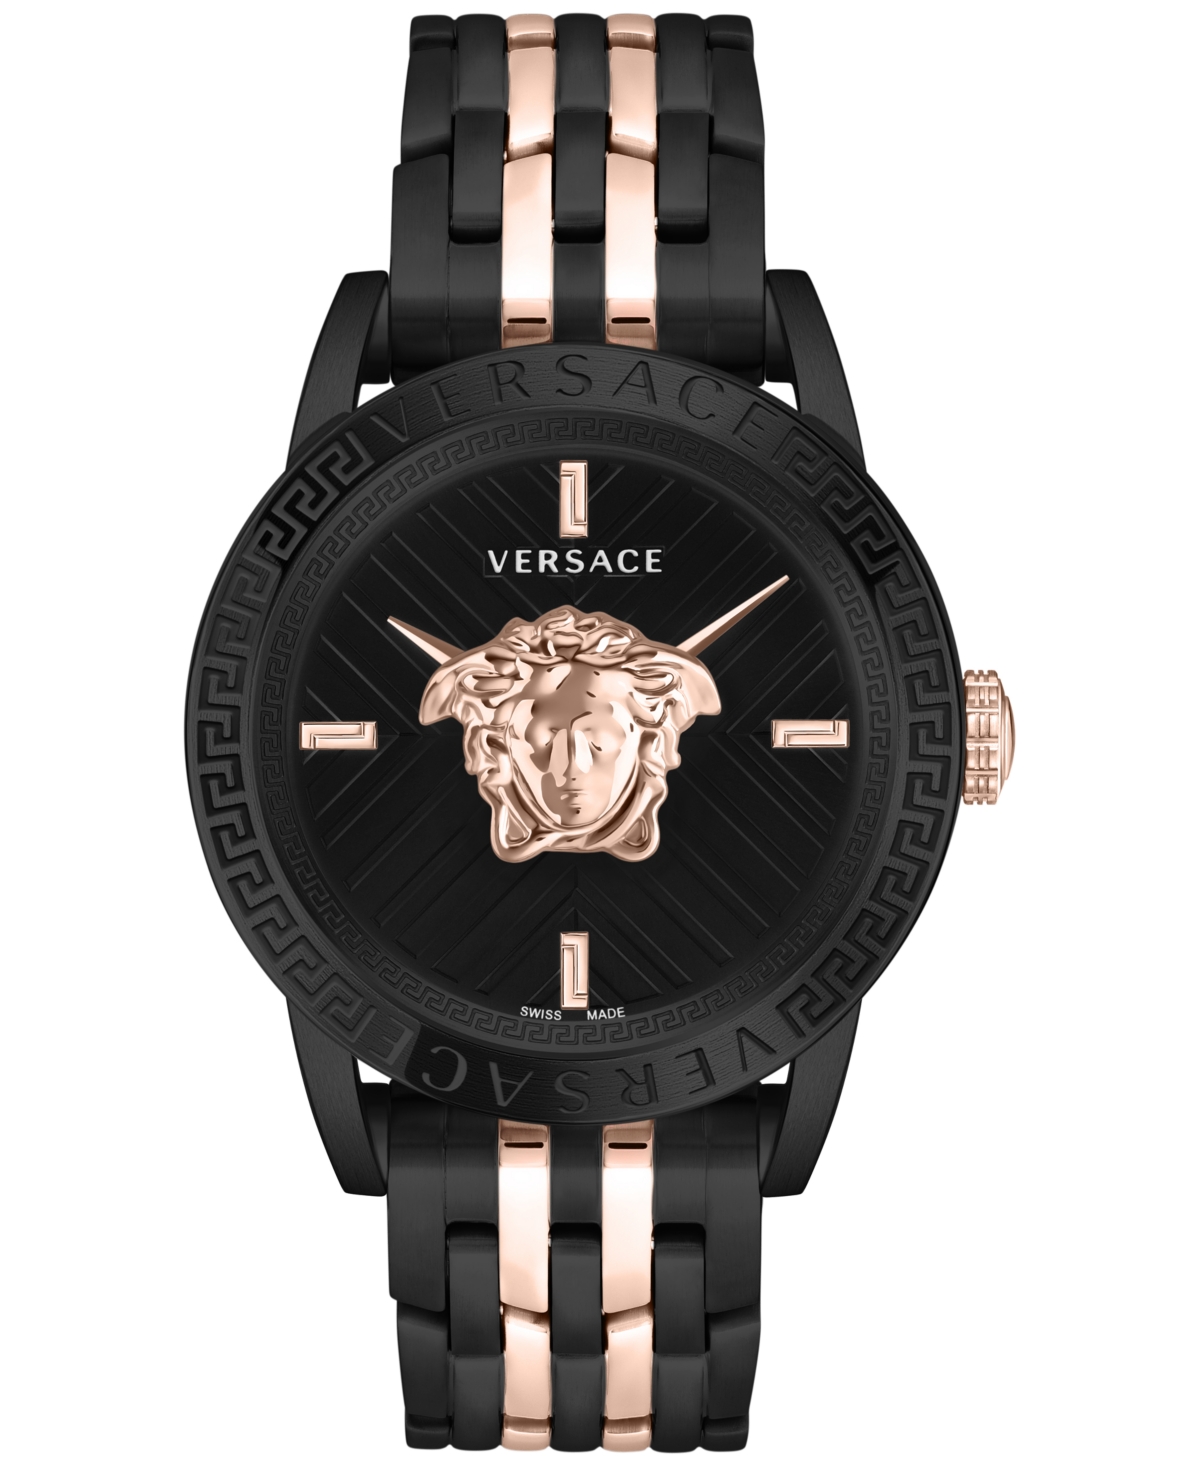 Versace Men's V-code Black & Rose Goldtone Stainless Steel Watch In Two Tone